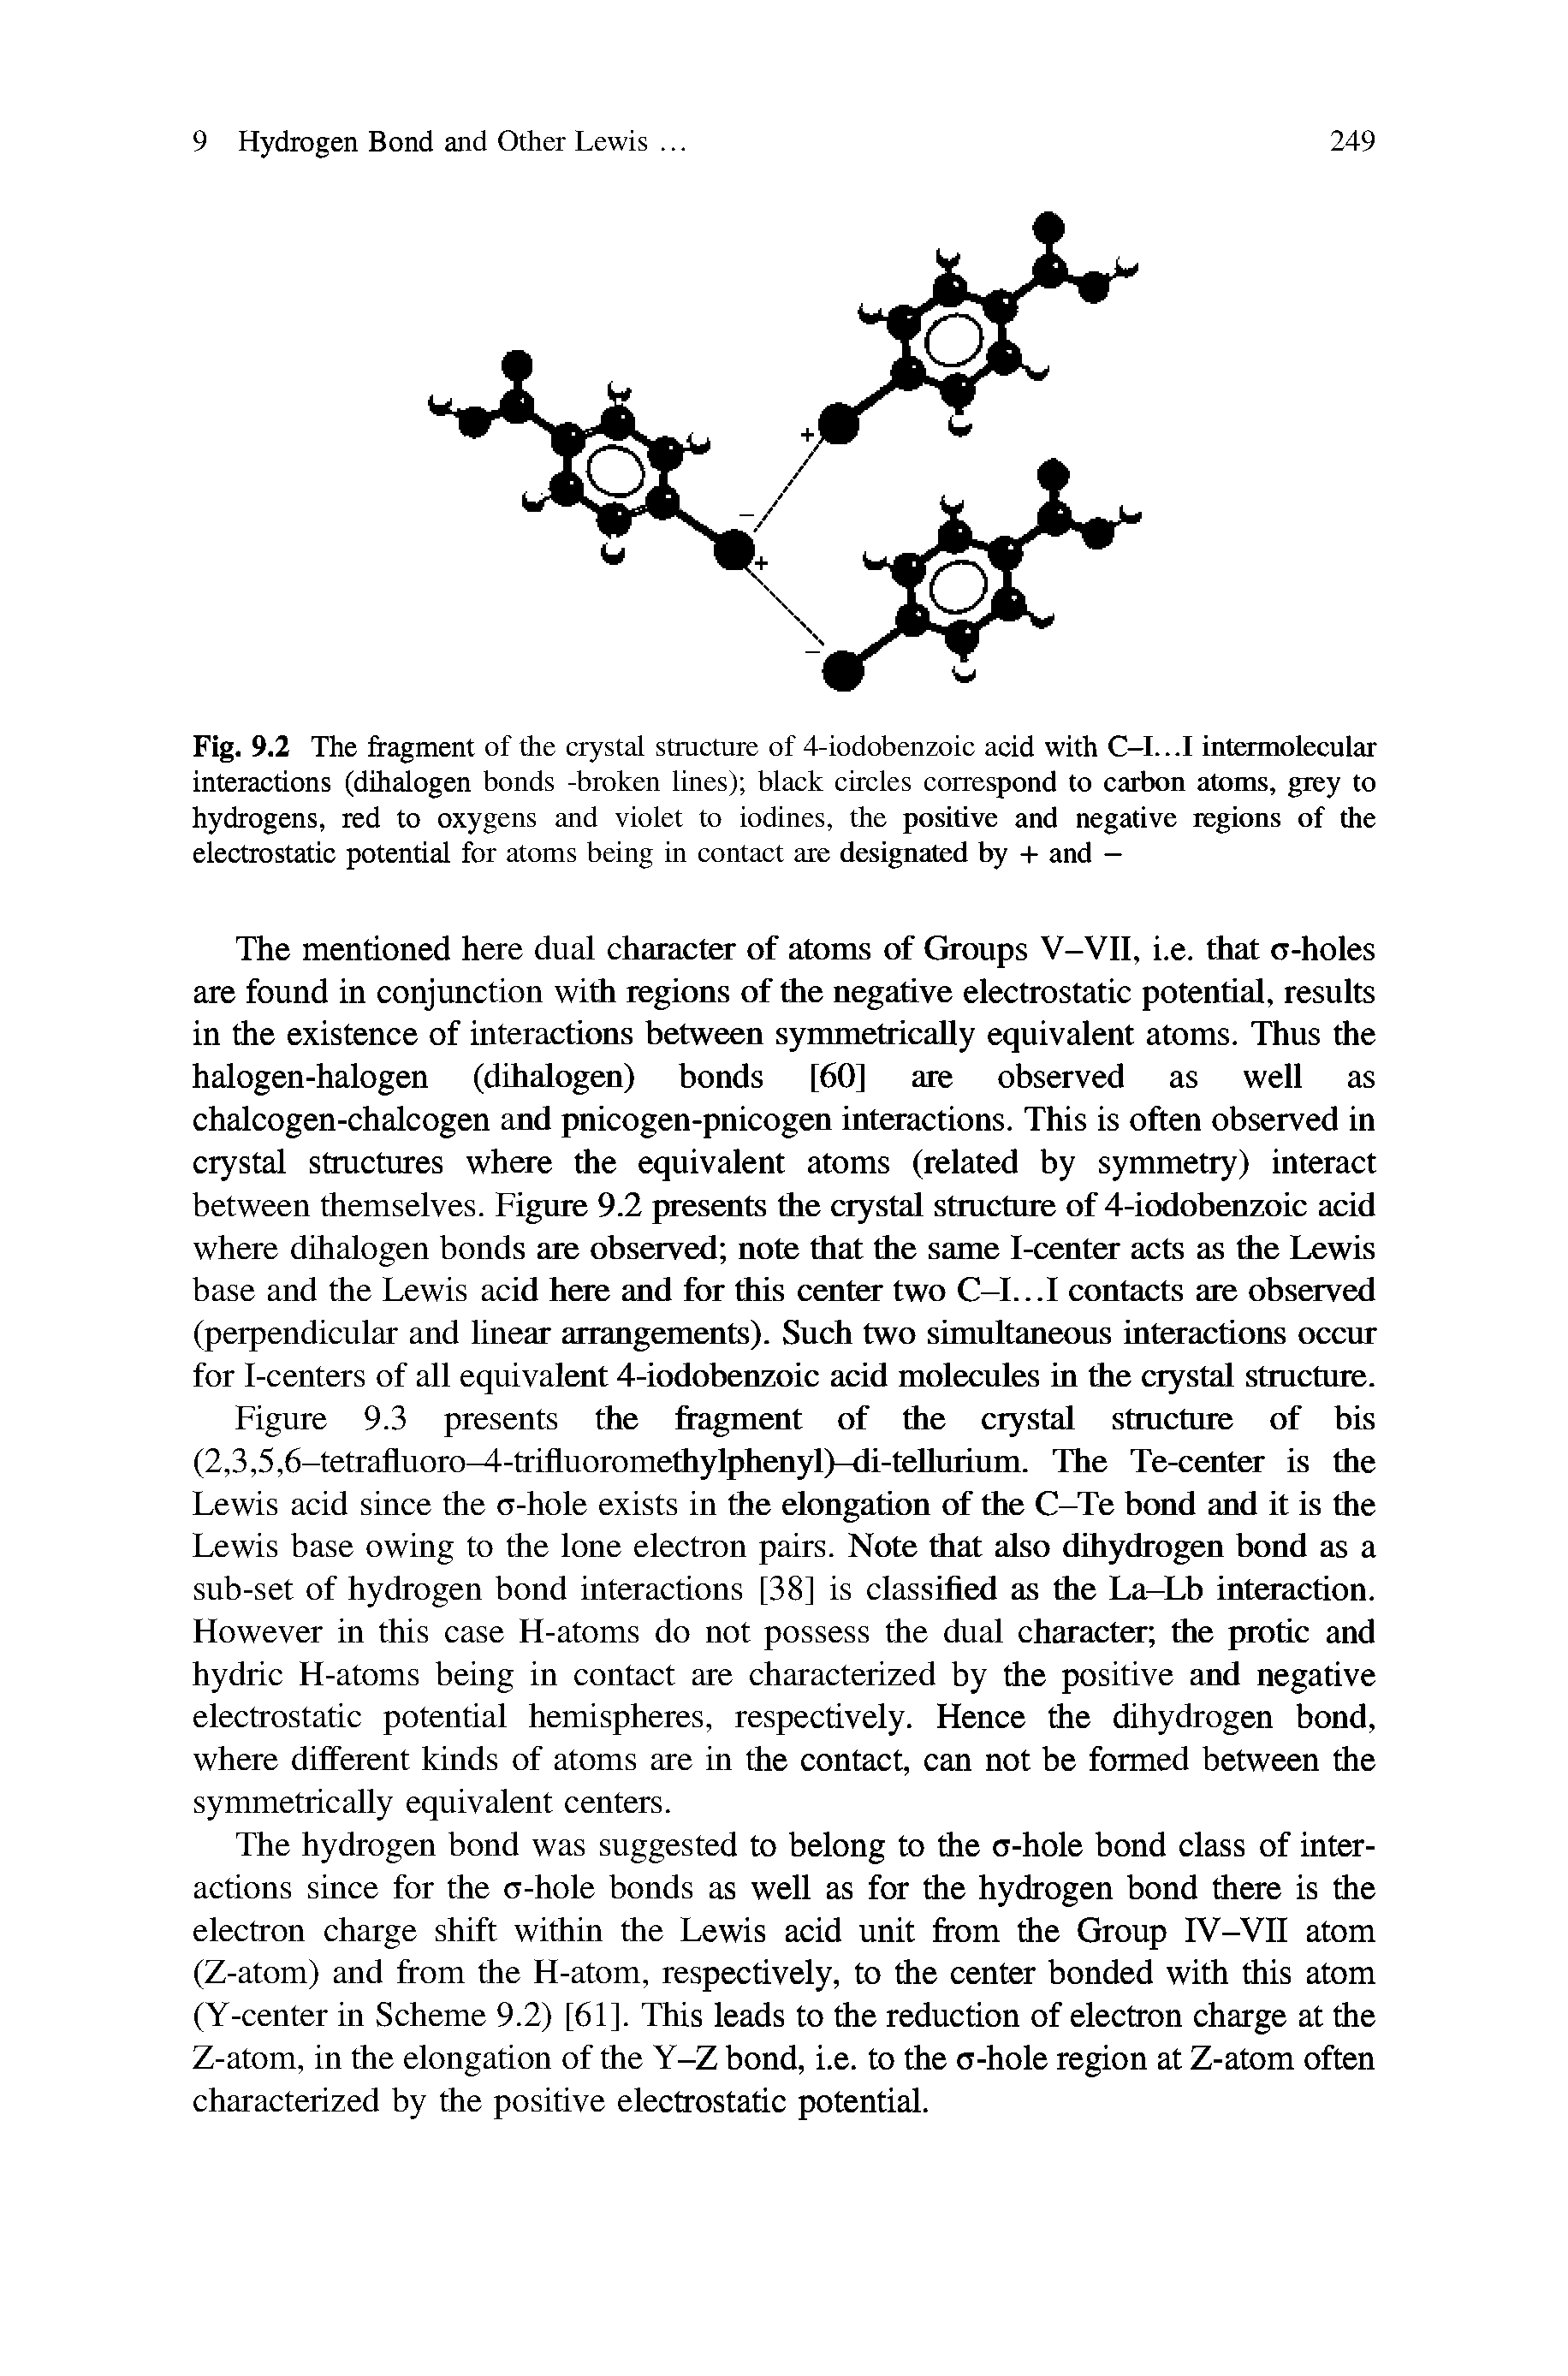 Fig. 9.2 The fragment of the crystal structure of 4-iodobenzoic acid with C-I...I intermolecular interactions (dihalogen bonds -broken lines) black circles correspond to carbon atoms, grey to hydrogens, red to oxygens and violet to iodines, the positive and negative regions of the electrostatic potential for atoms being in contact are designated by + and —...